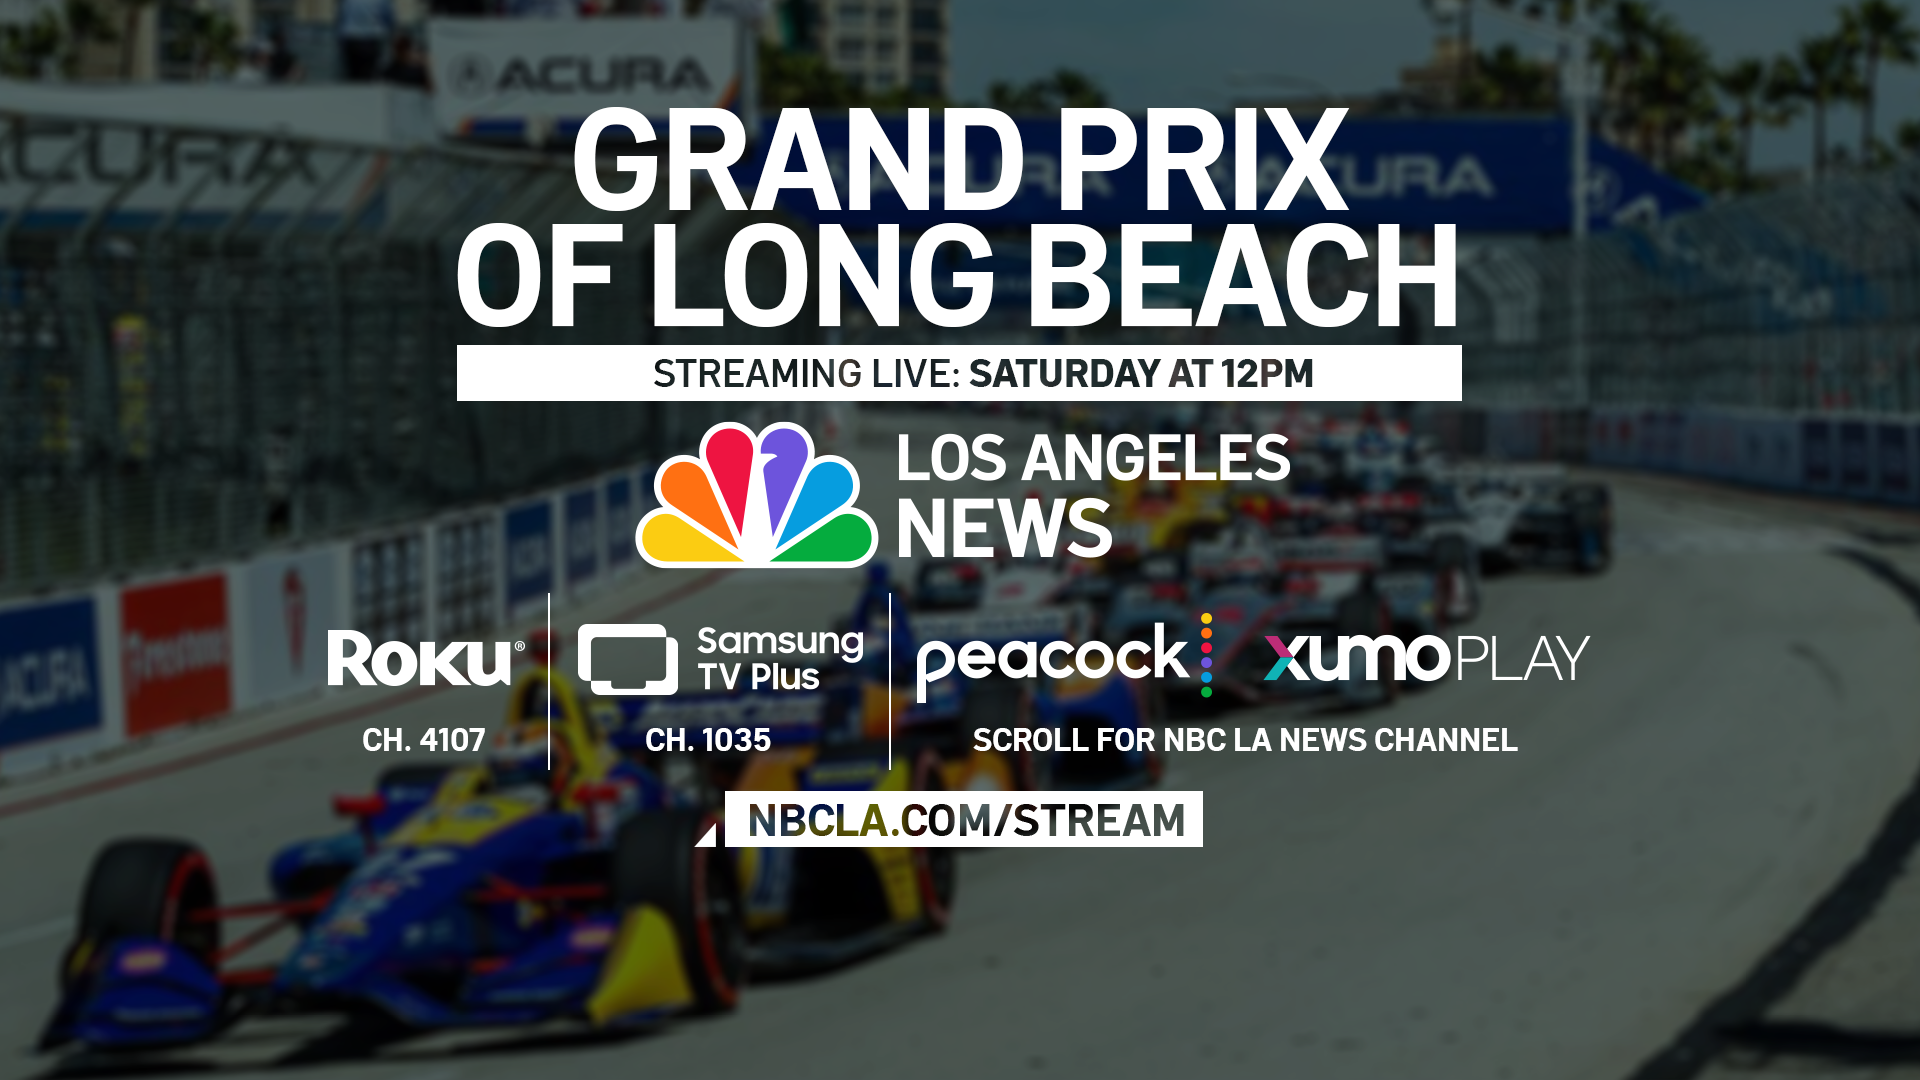 How to Watch the Grand Prix of Long Beach